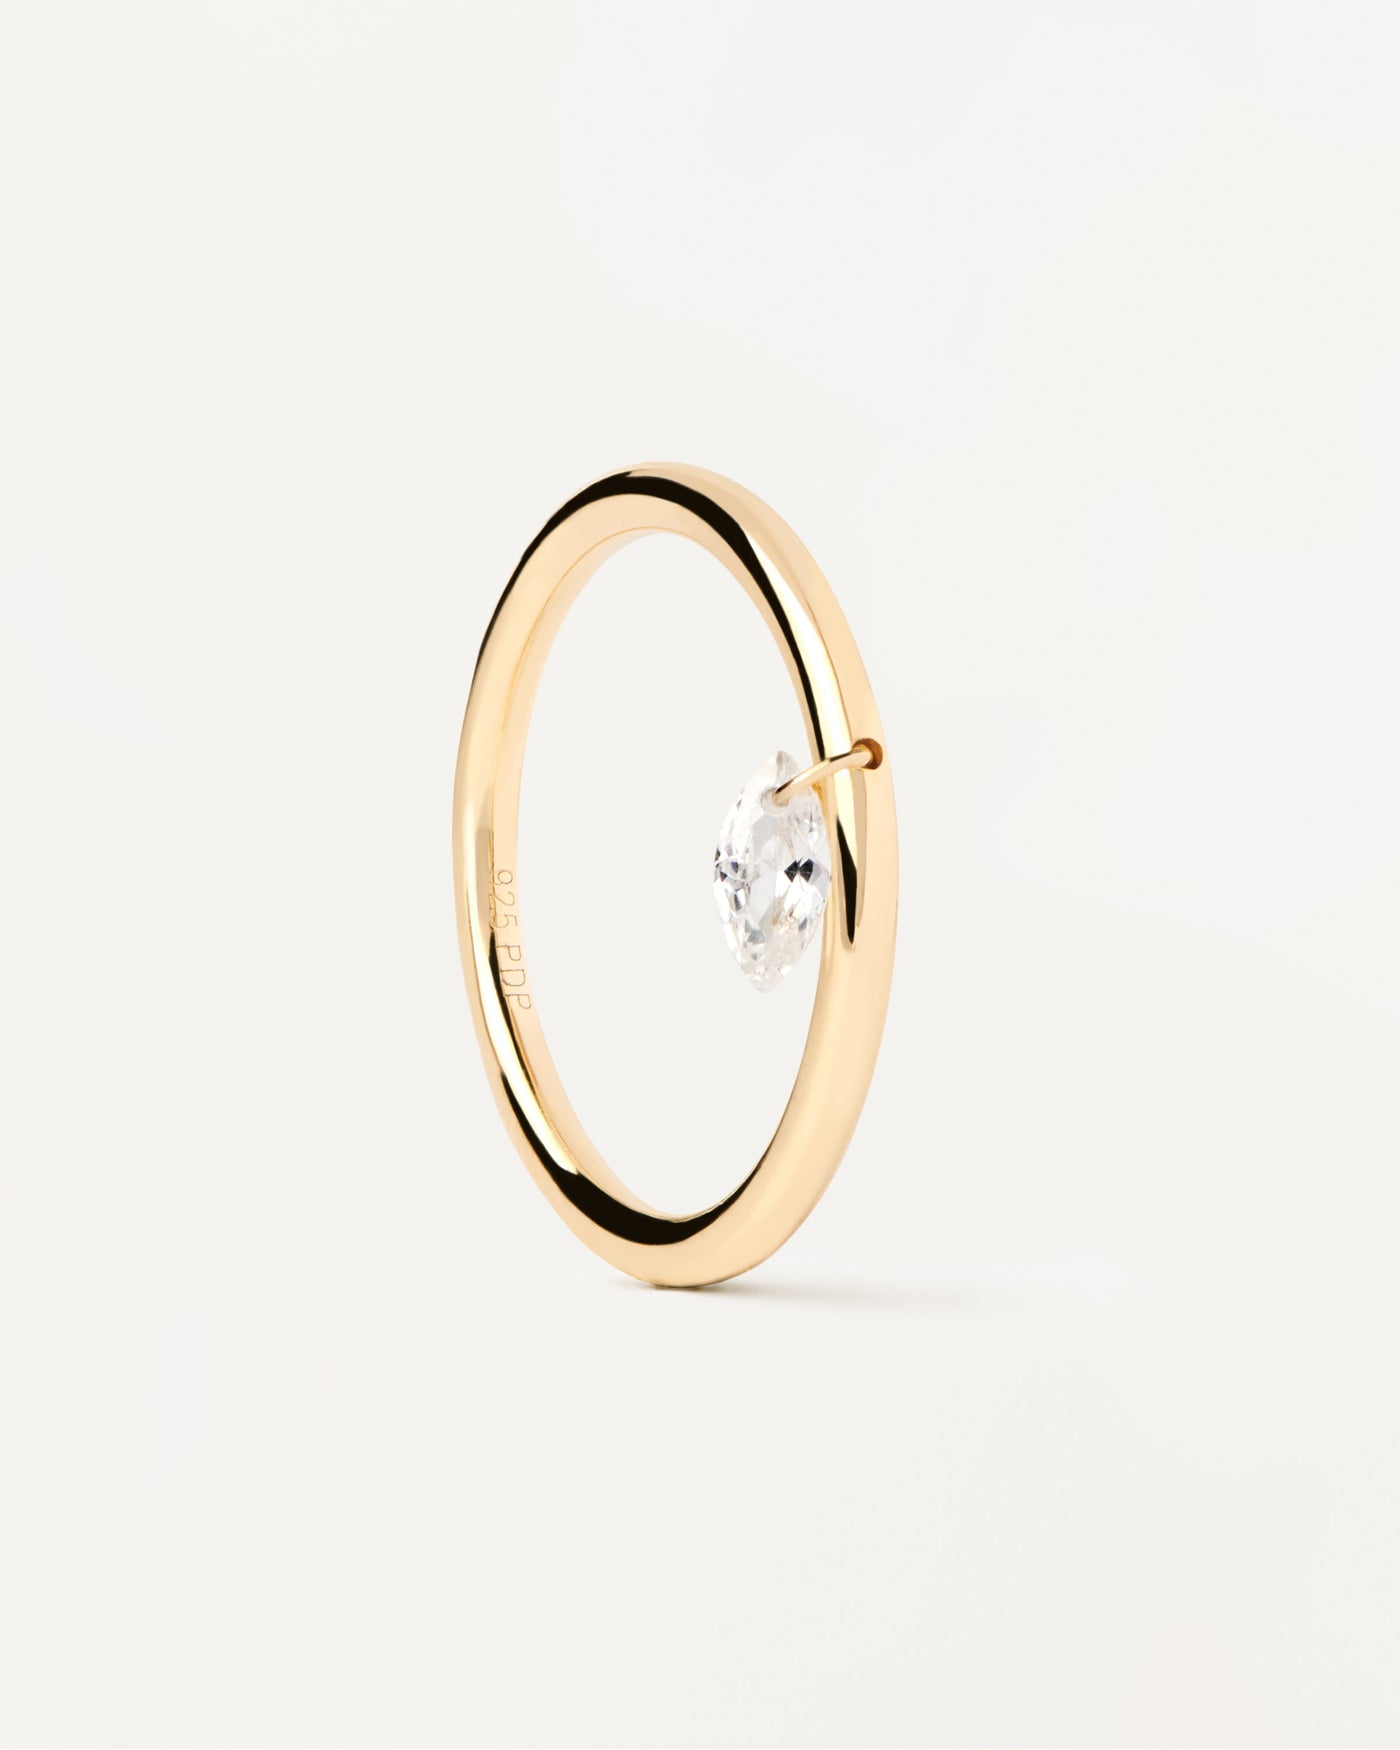 2023 Selection | Rain Solitary Ring. Gold-plated silver ring with small white zirconia drop pendant. Get the latest arrival from PDPAOLA. Place your order safely and get this Best Seller. Free Shipping.